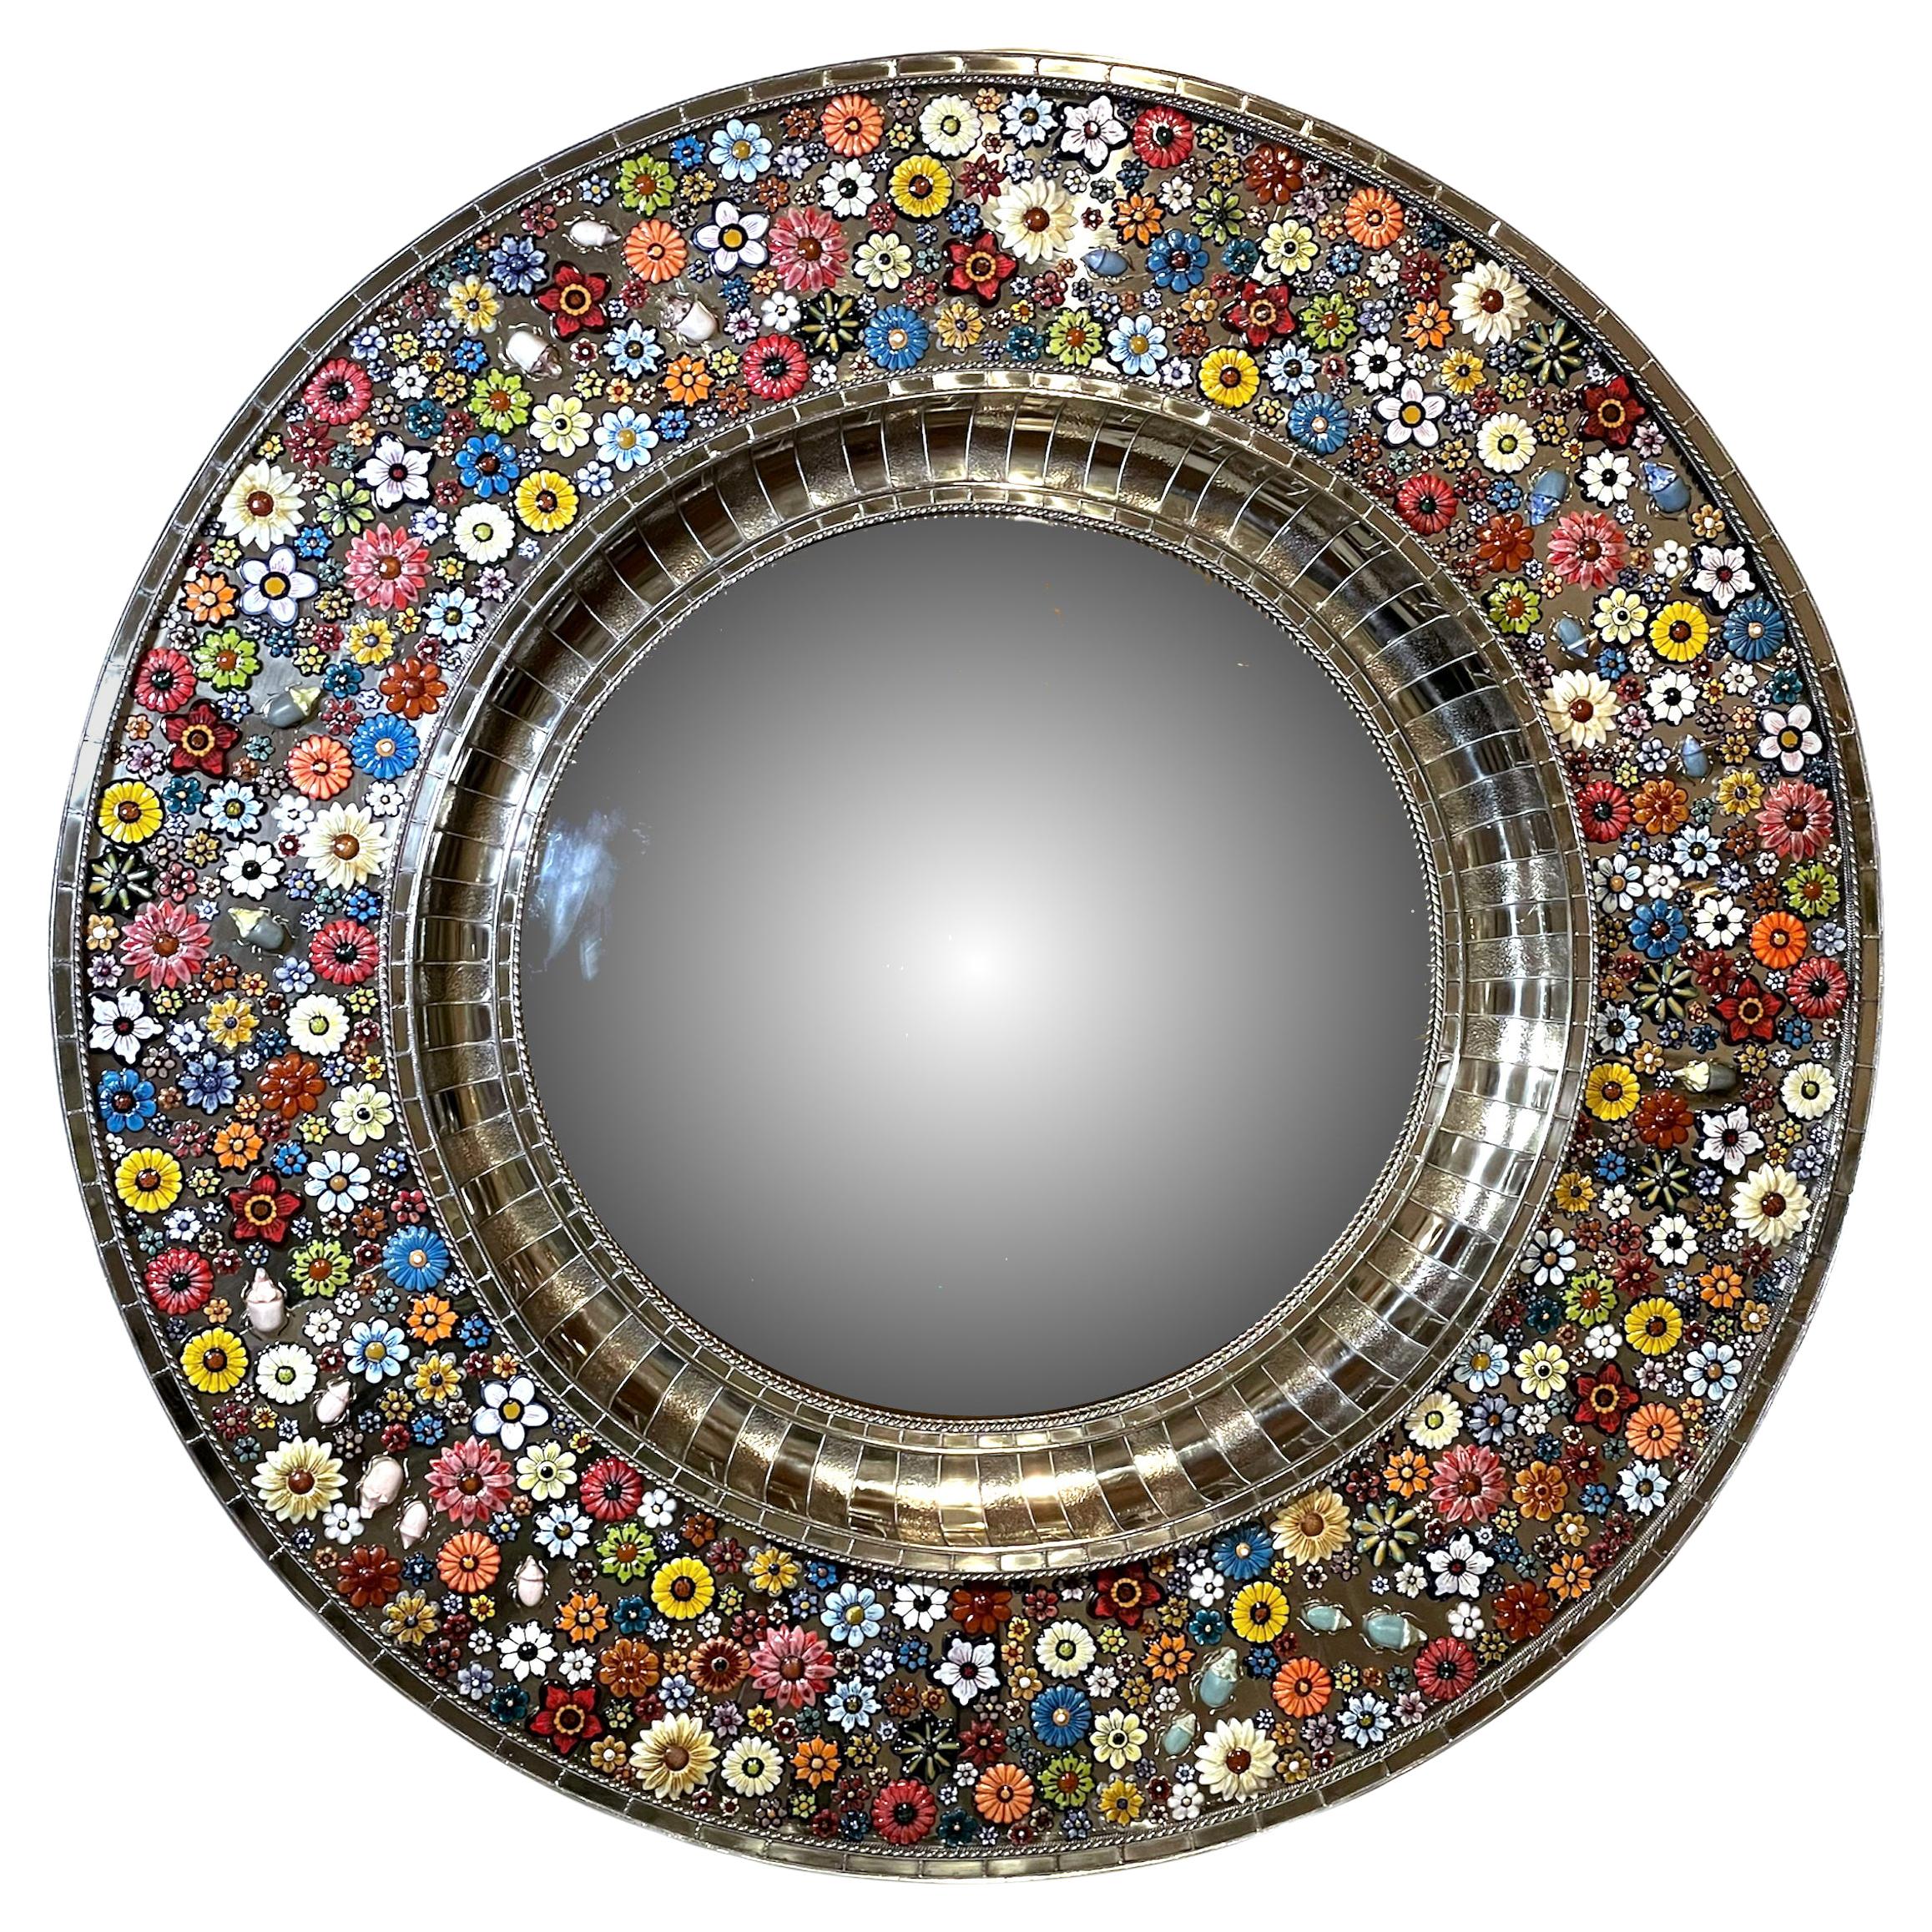 Roundy Convex Mirror,  Hand Painted Ceramic Flowers and Insects over White Metal